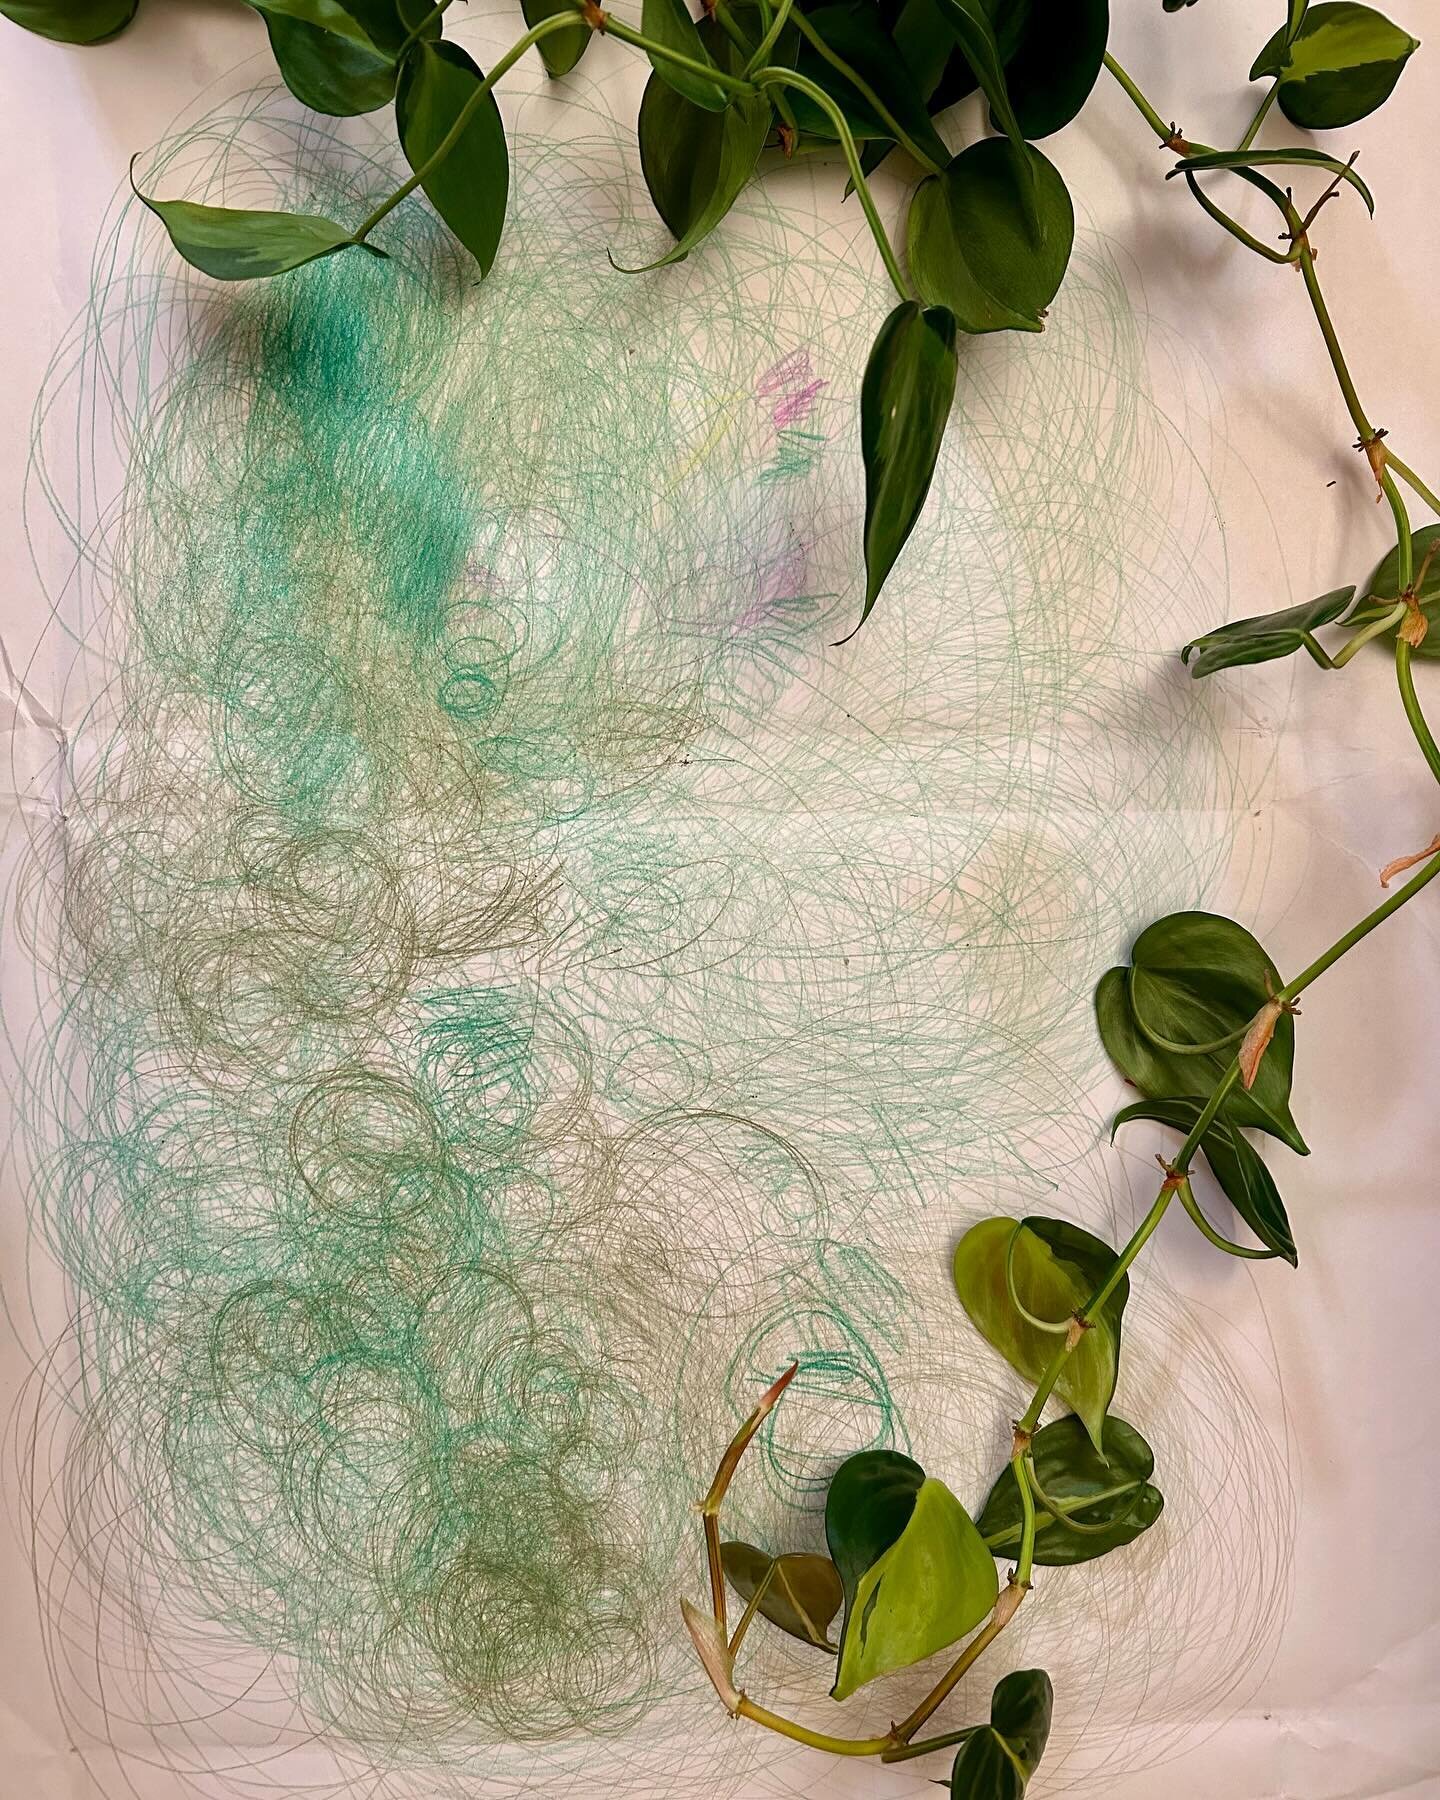 A moment of rest in a busy work catch-up and errand-filled weekend. ⁣Thanks @heyheyshauna 💚
⁣
Image description: A drawing on paper with swirly pencil crayon marks in shades of green. It&rsquo;s framed by variegated leaves of a philodendron housepla